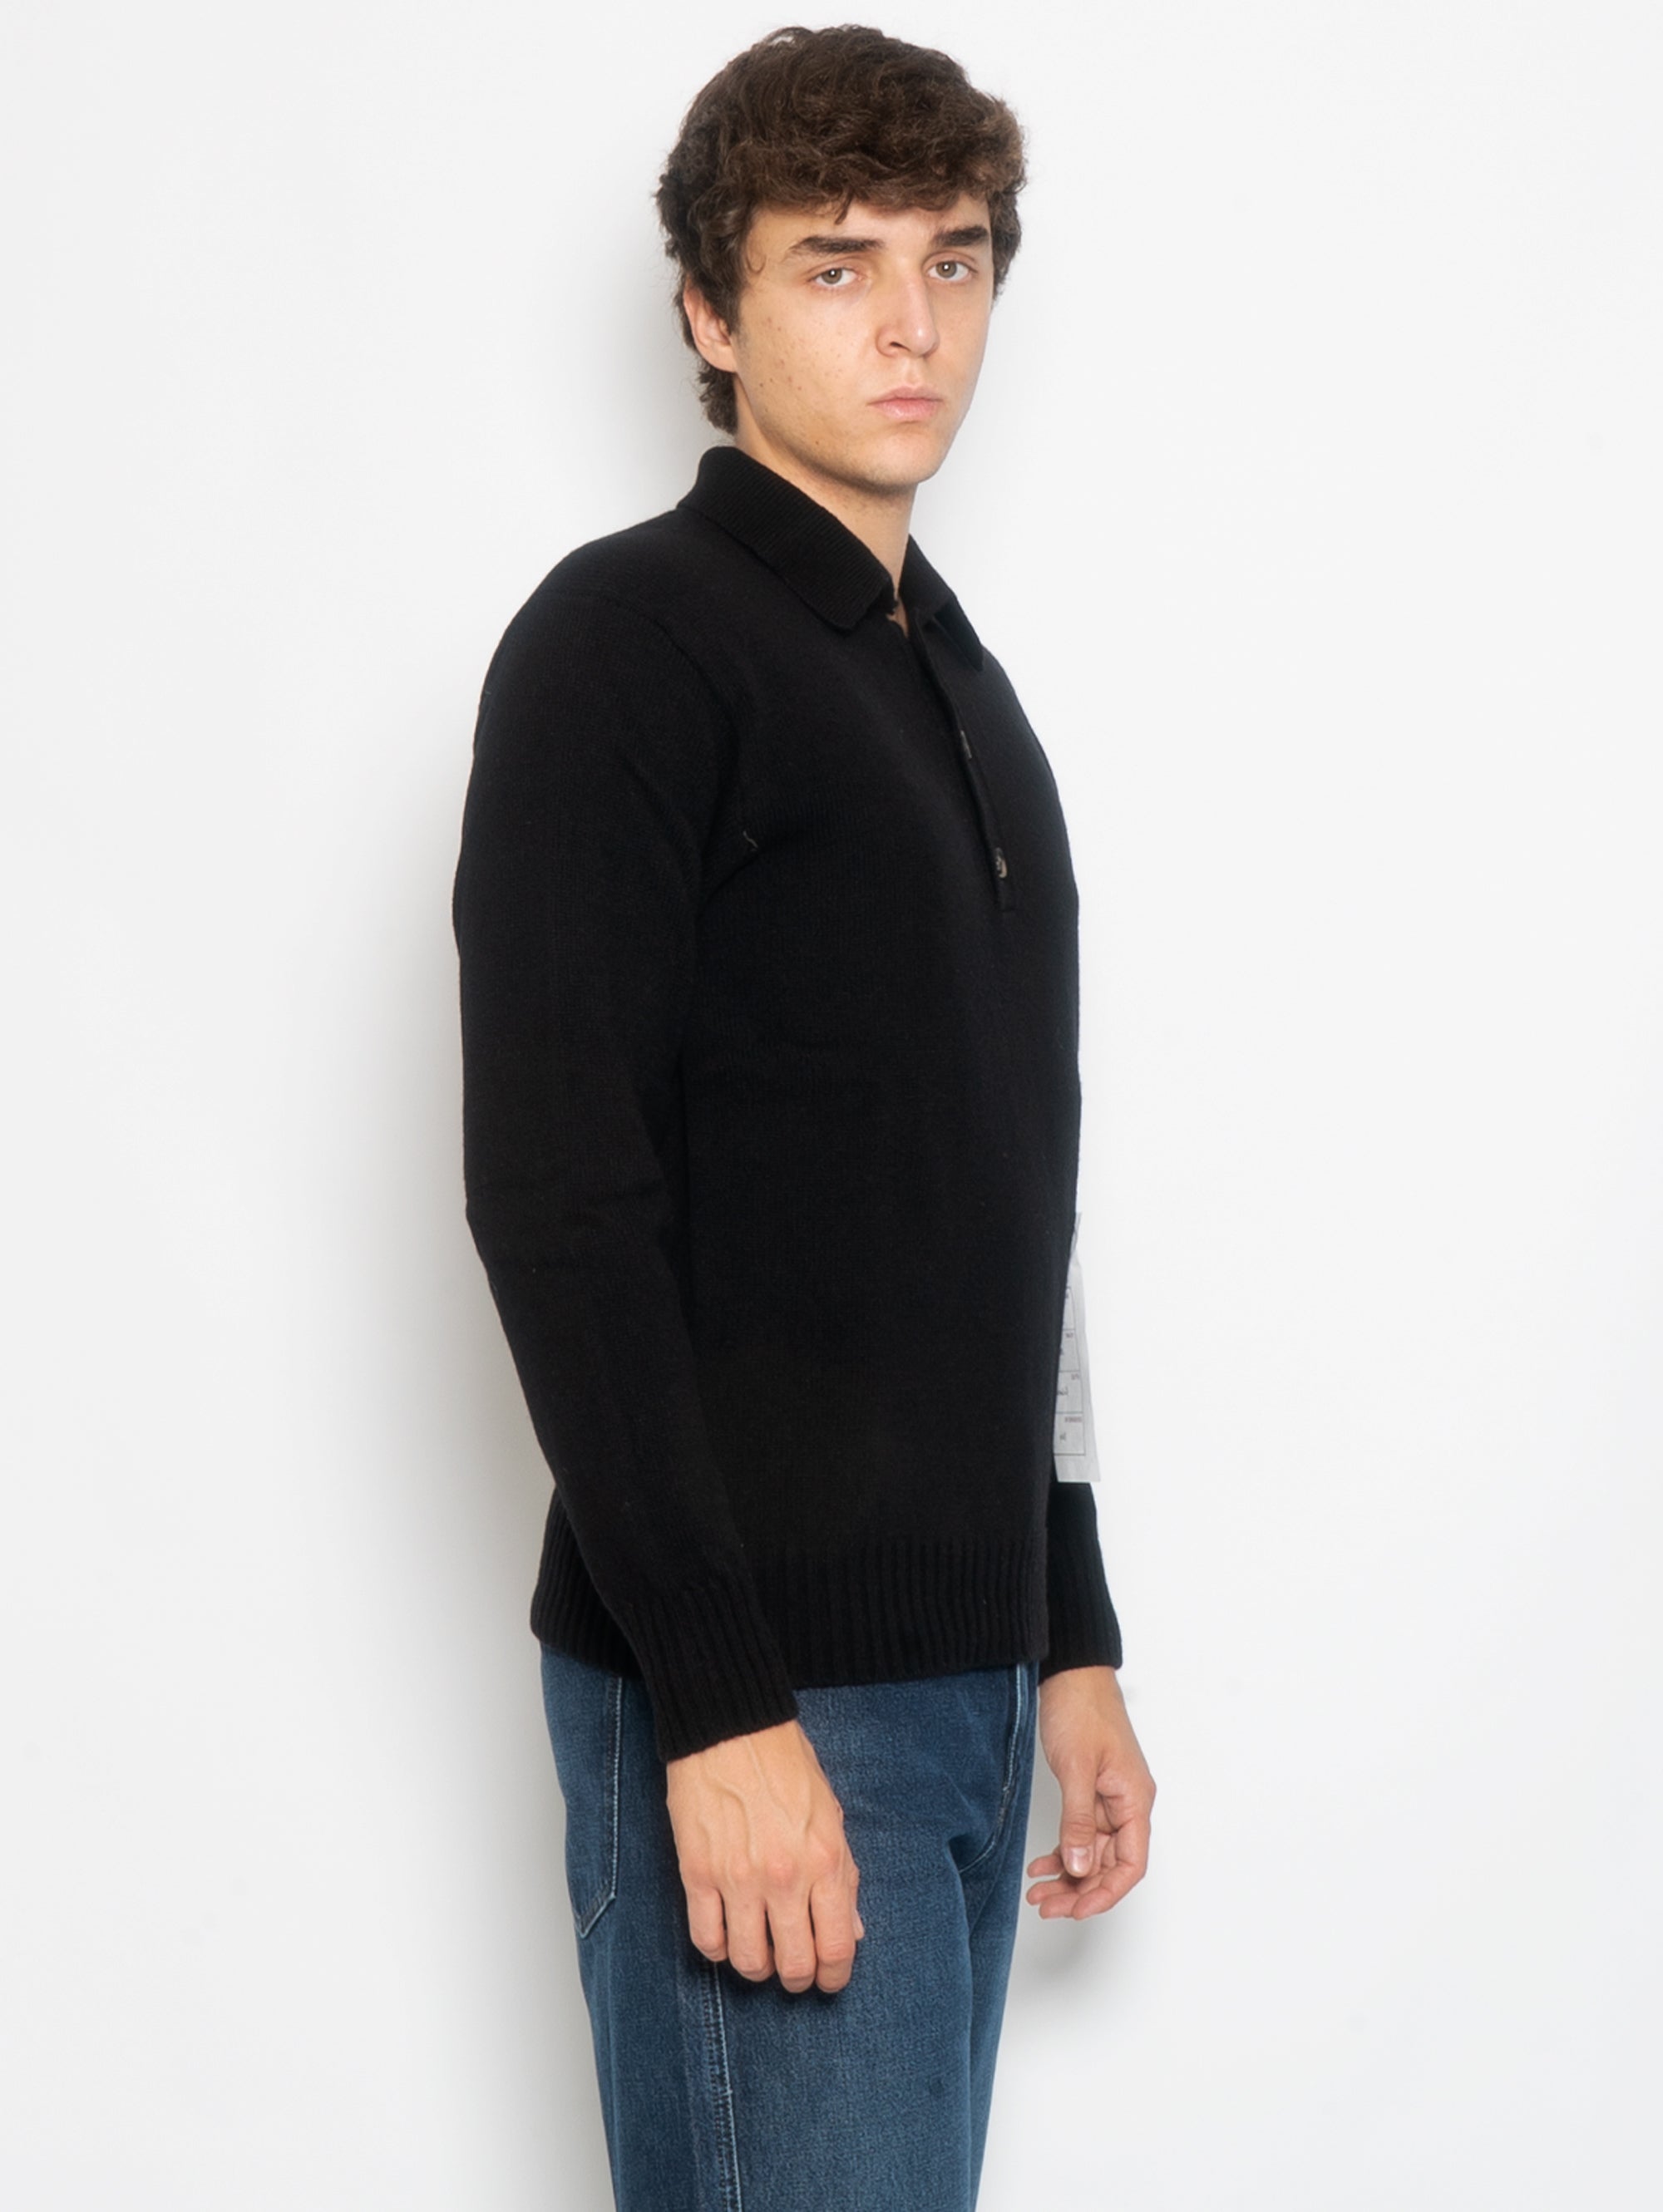 Long Sleeve Polo Shirt in Black Wool and Cashmere